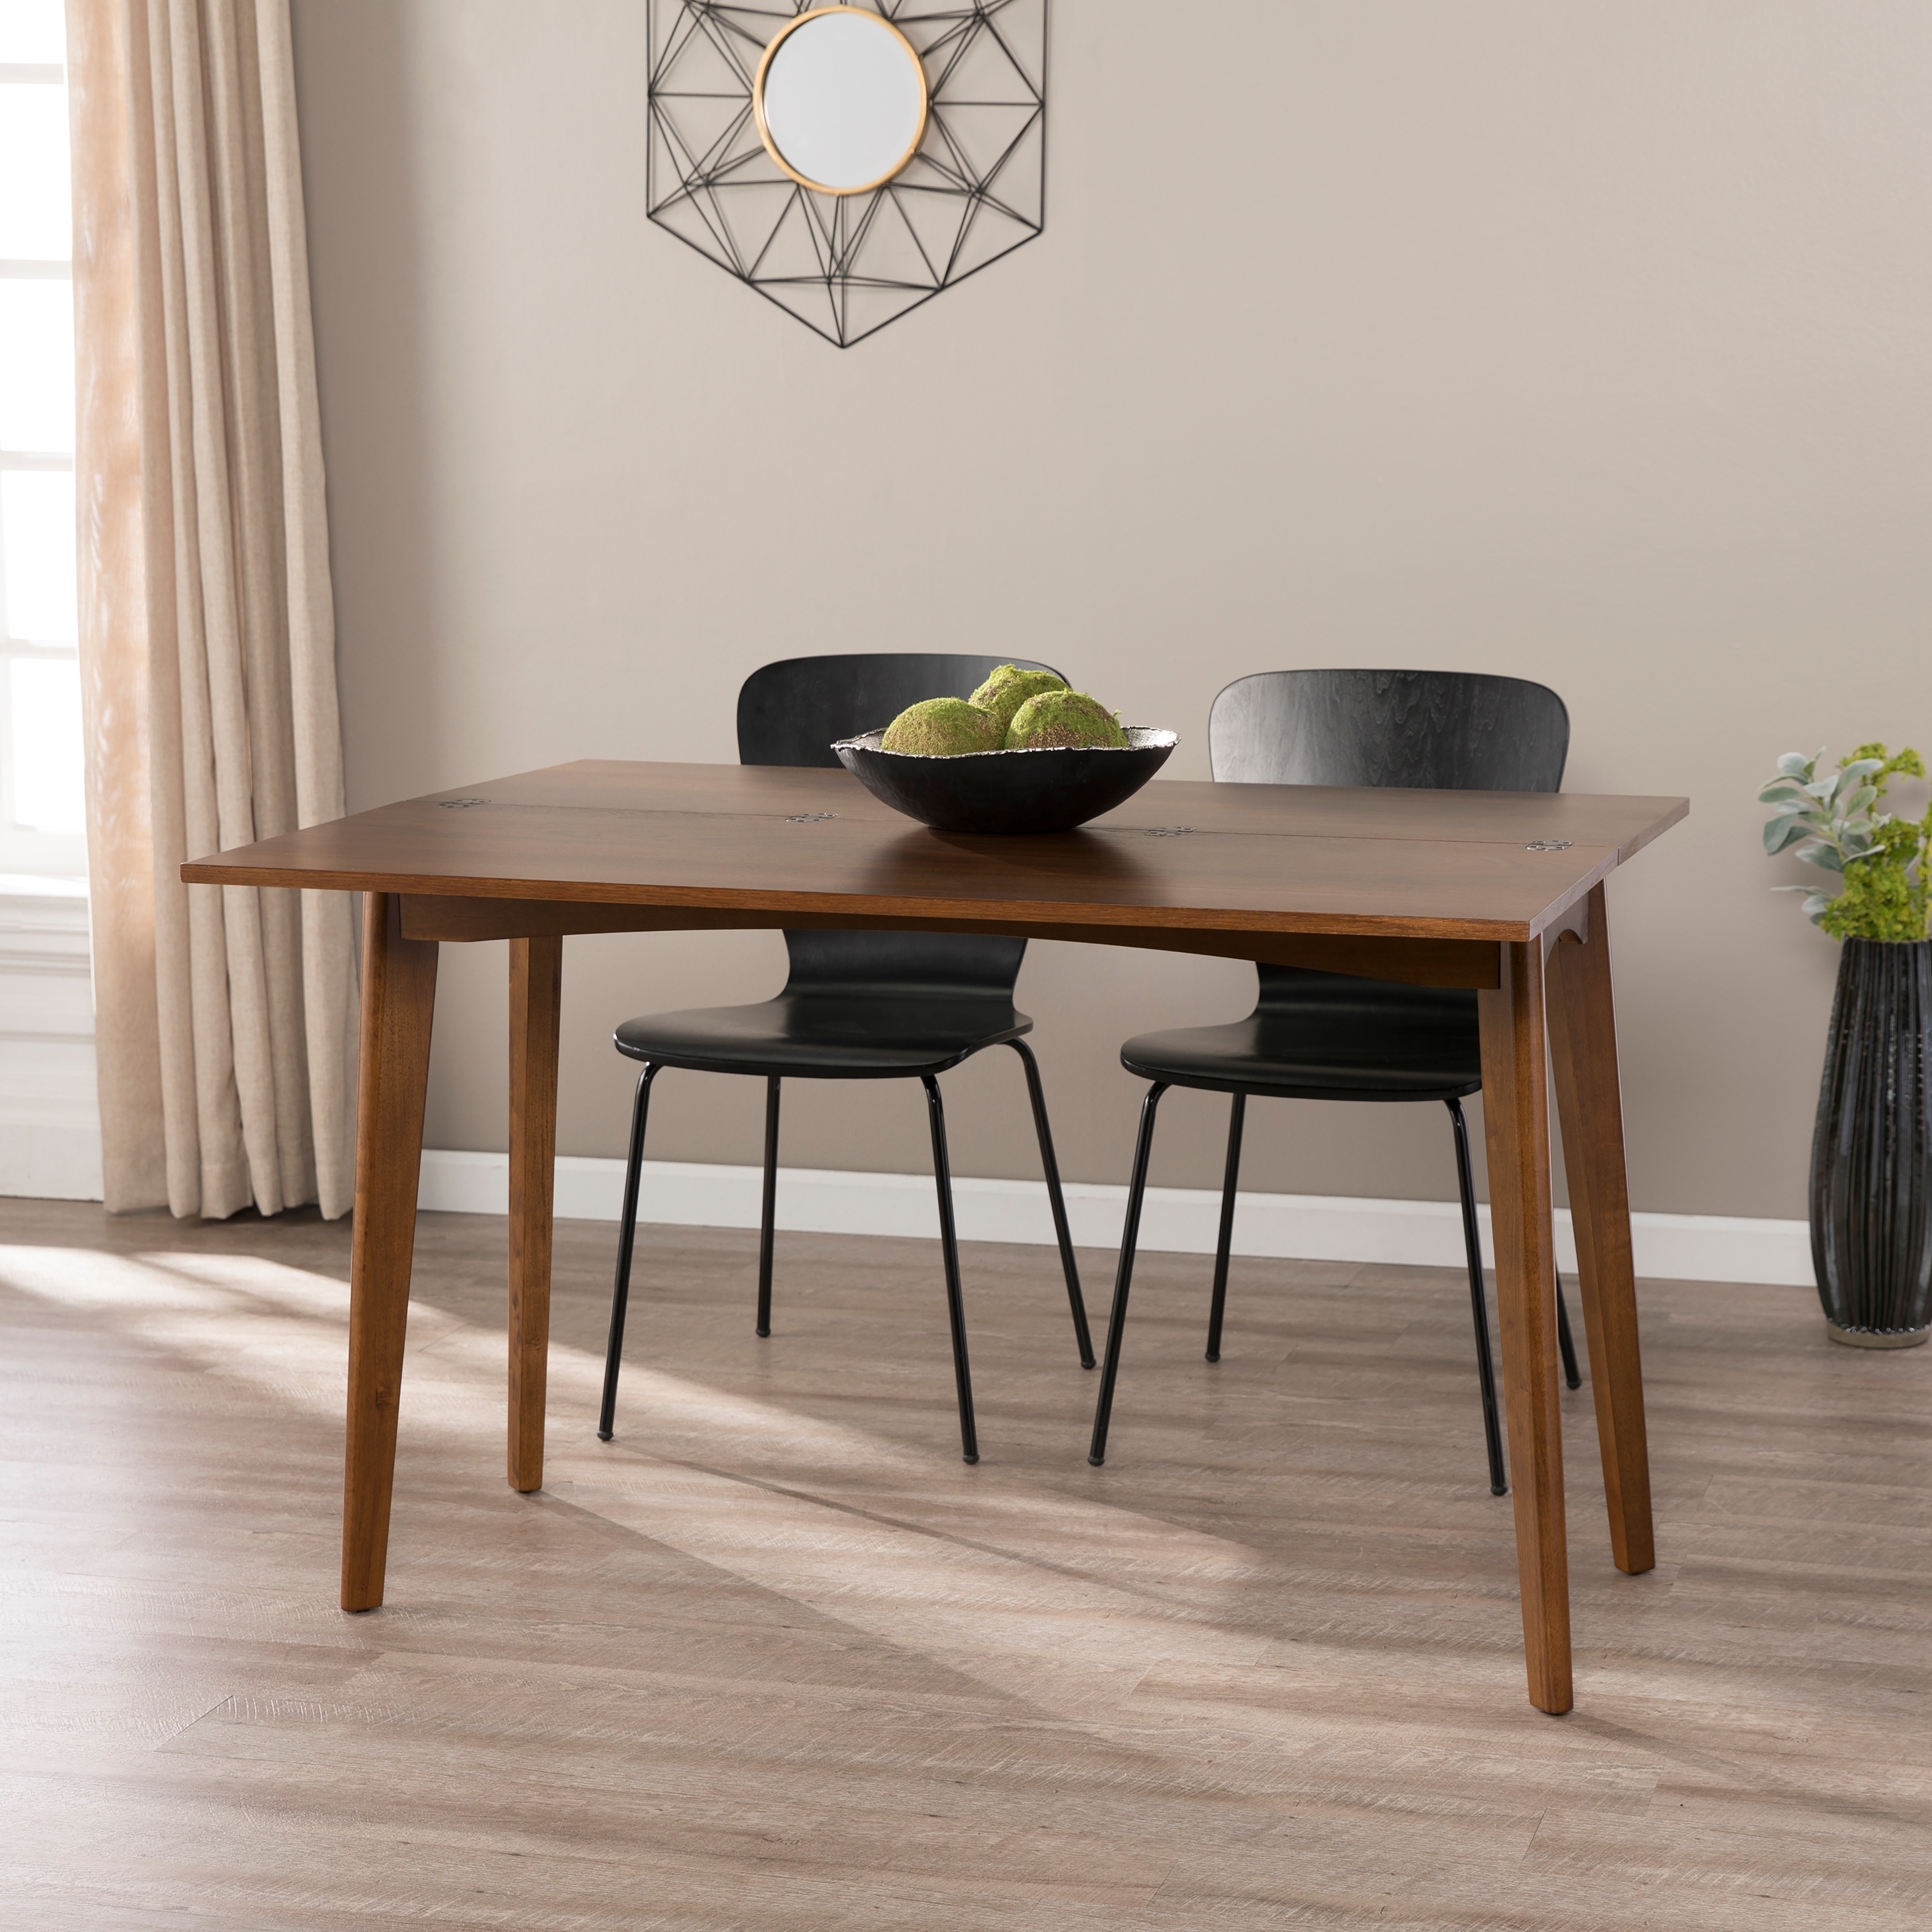 Kumpulan Contemporary Dining Room Tables With Leaves | Dinirom